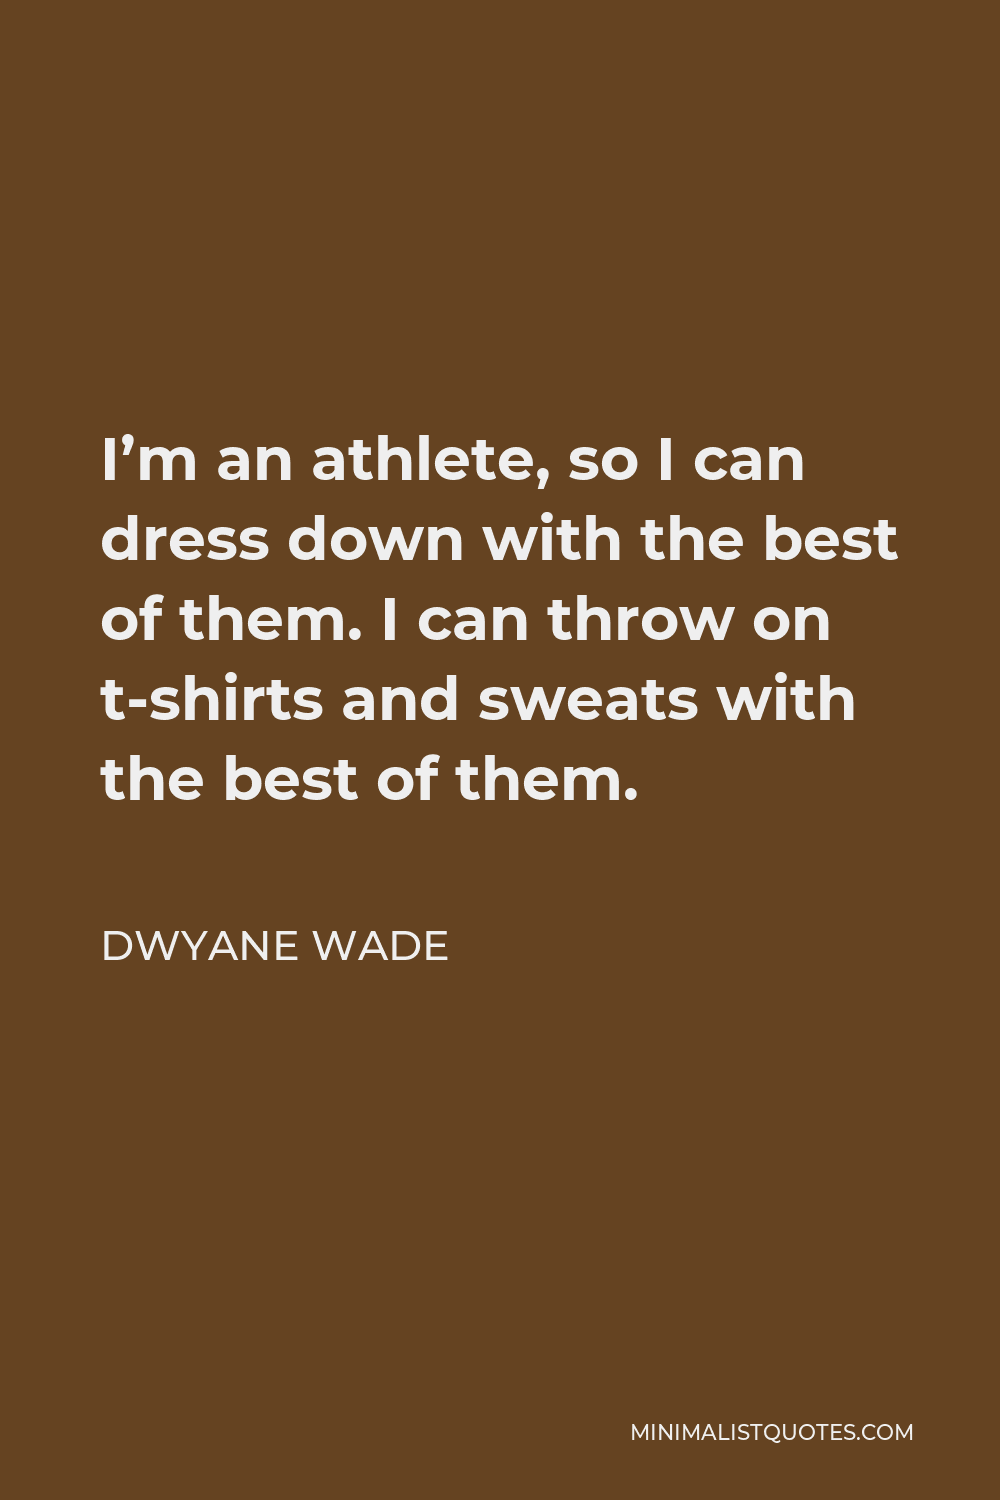 Dwyane Wade Quote - I’m an athlete, so I can dress down with the best of them. I can throw on t-shirts and sweats with the best of them.